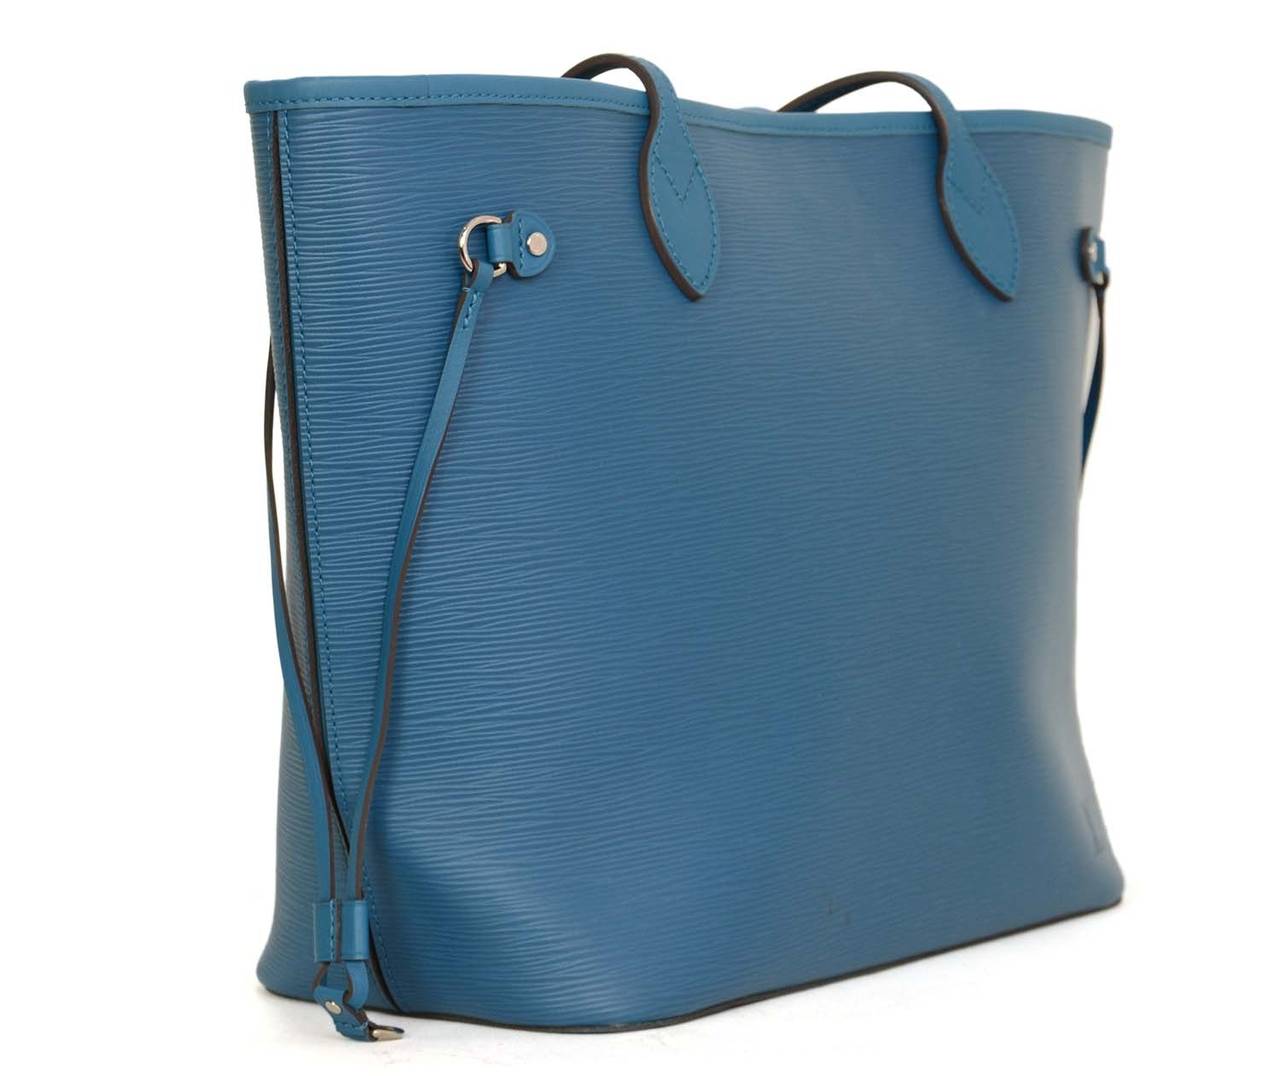 LOUIS VUITTON 2013 Teal Epi Leather Neverfull MM Tote Bag rt $2,050 at 1stdibs